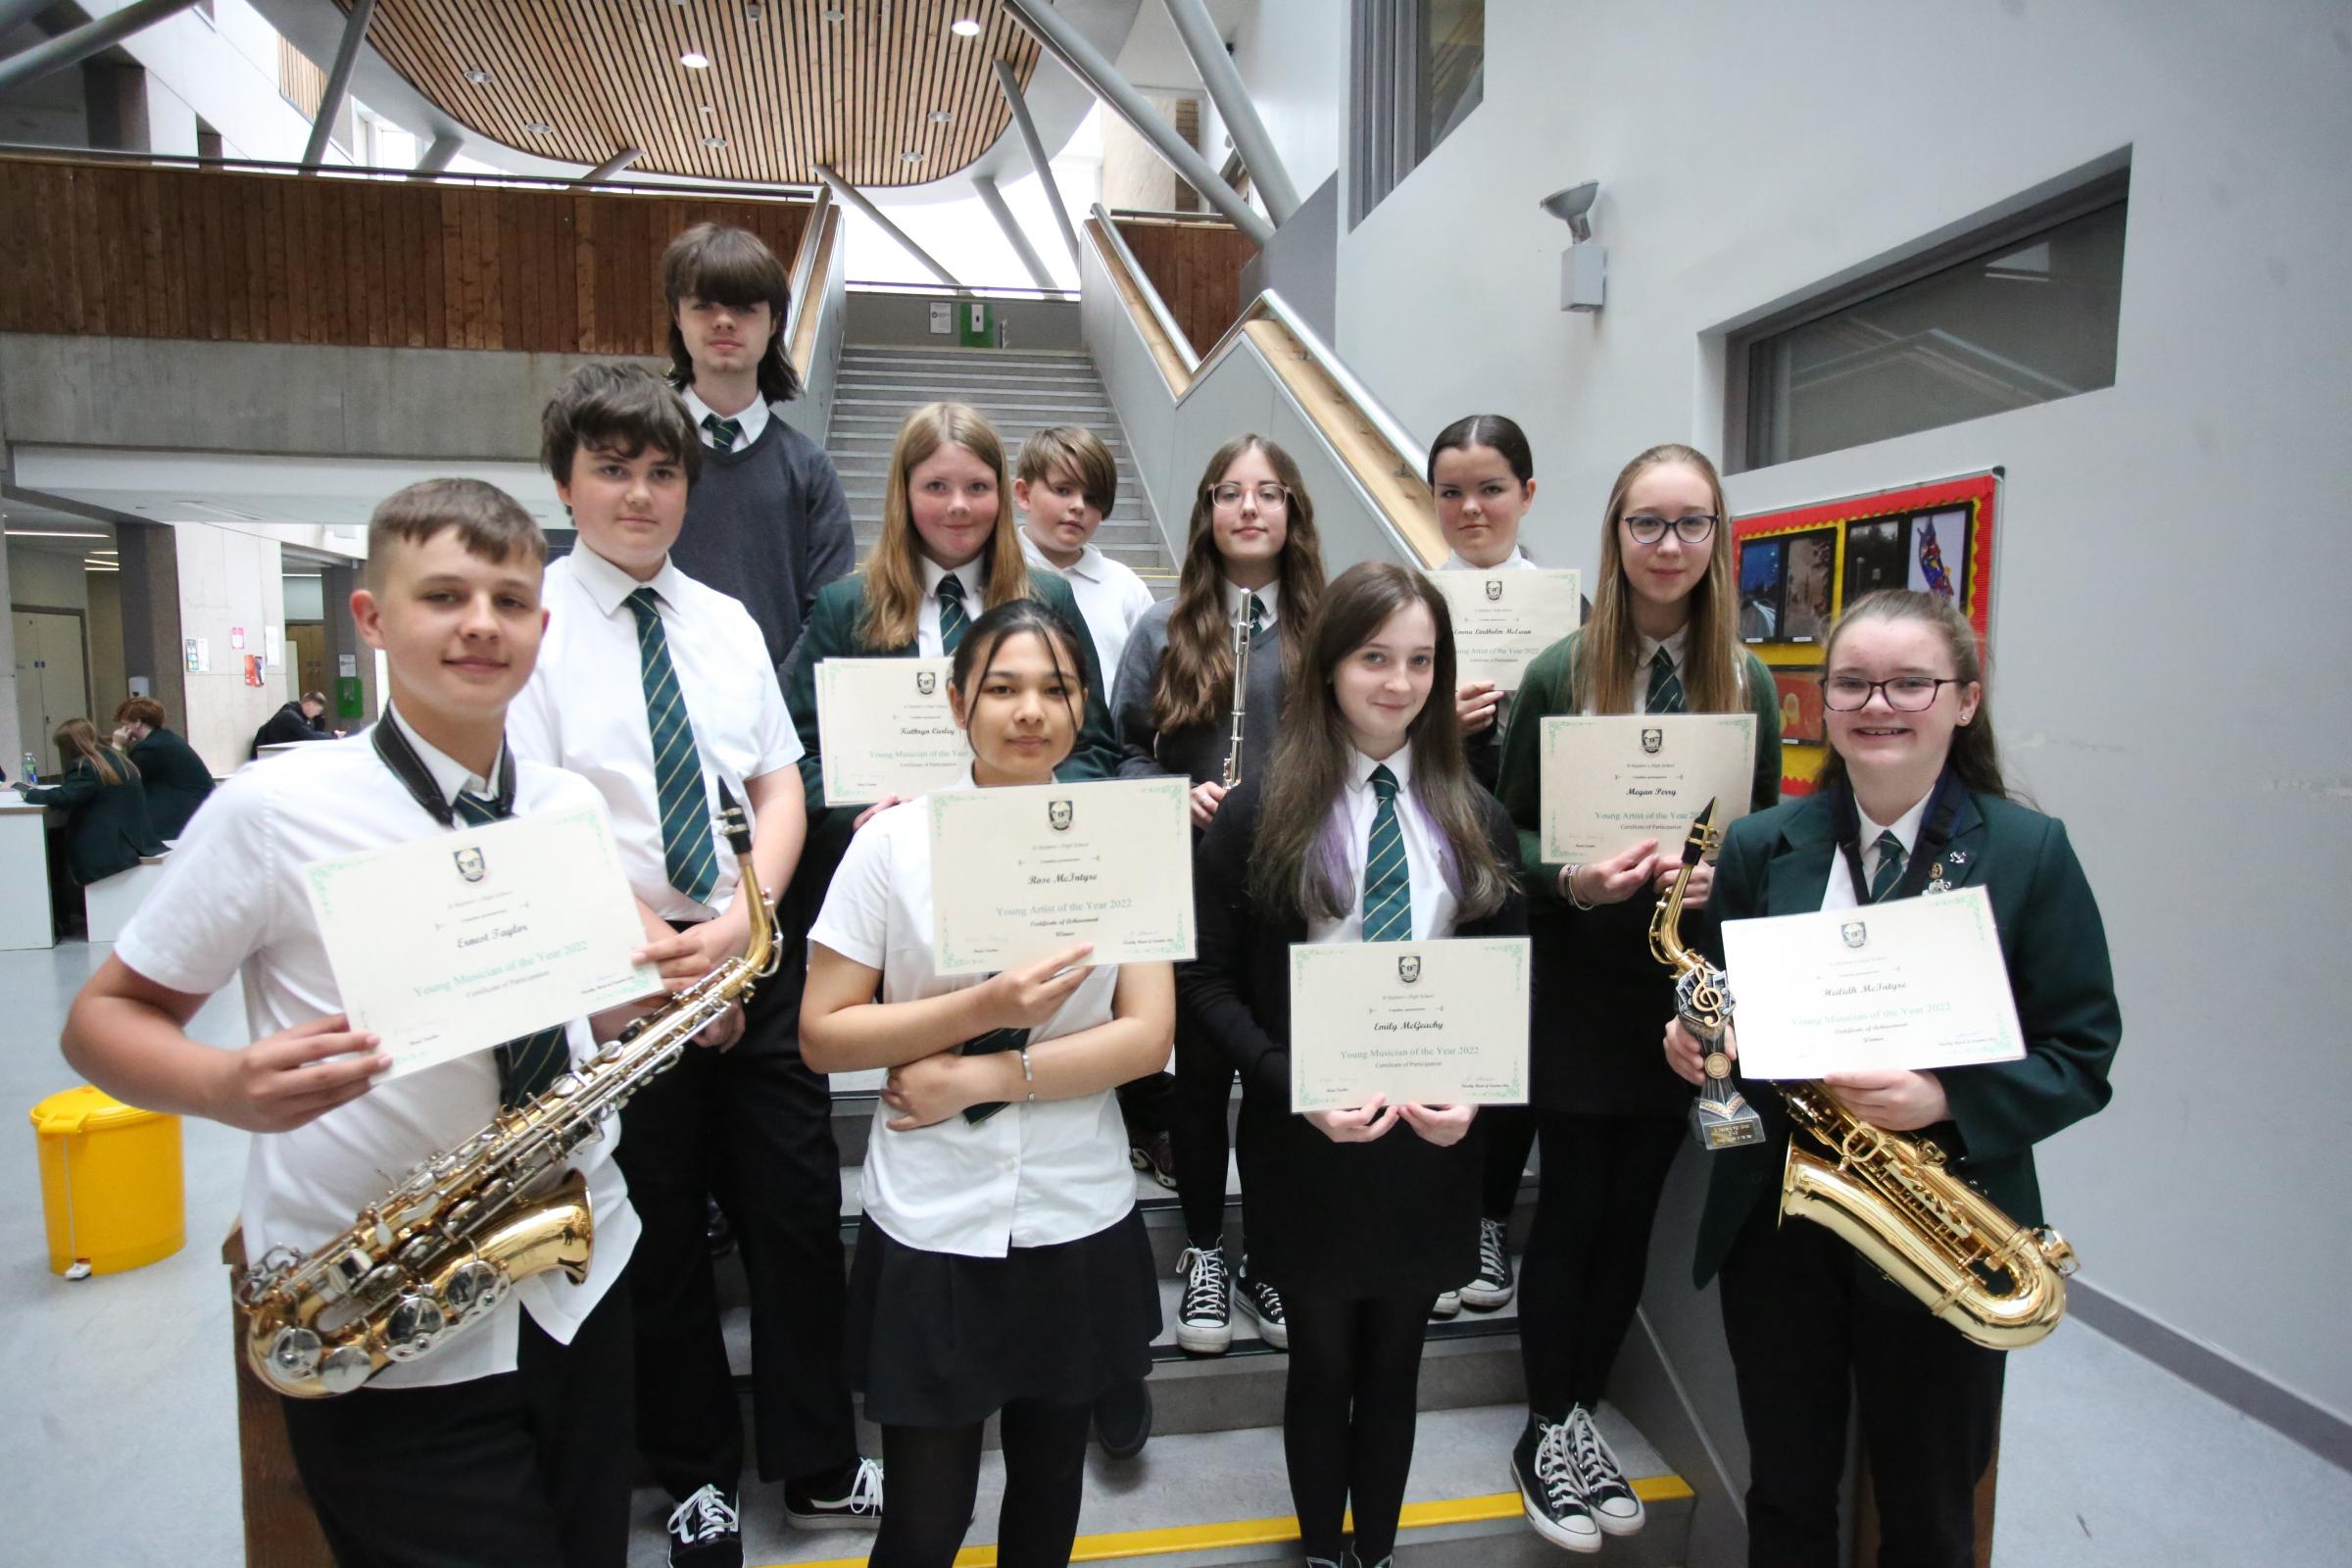 St Stephen's High School crown musician and artist of year